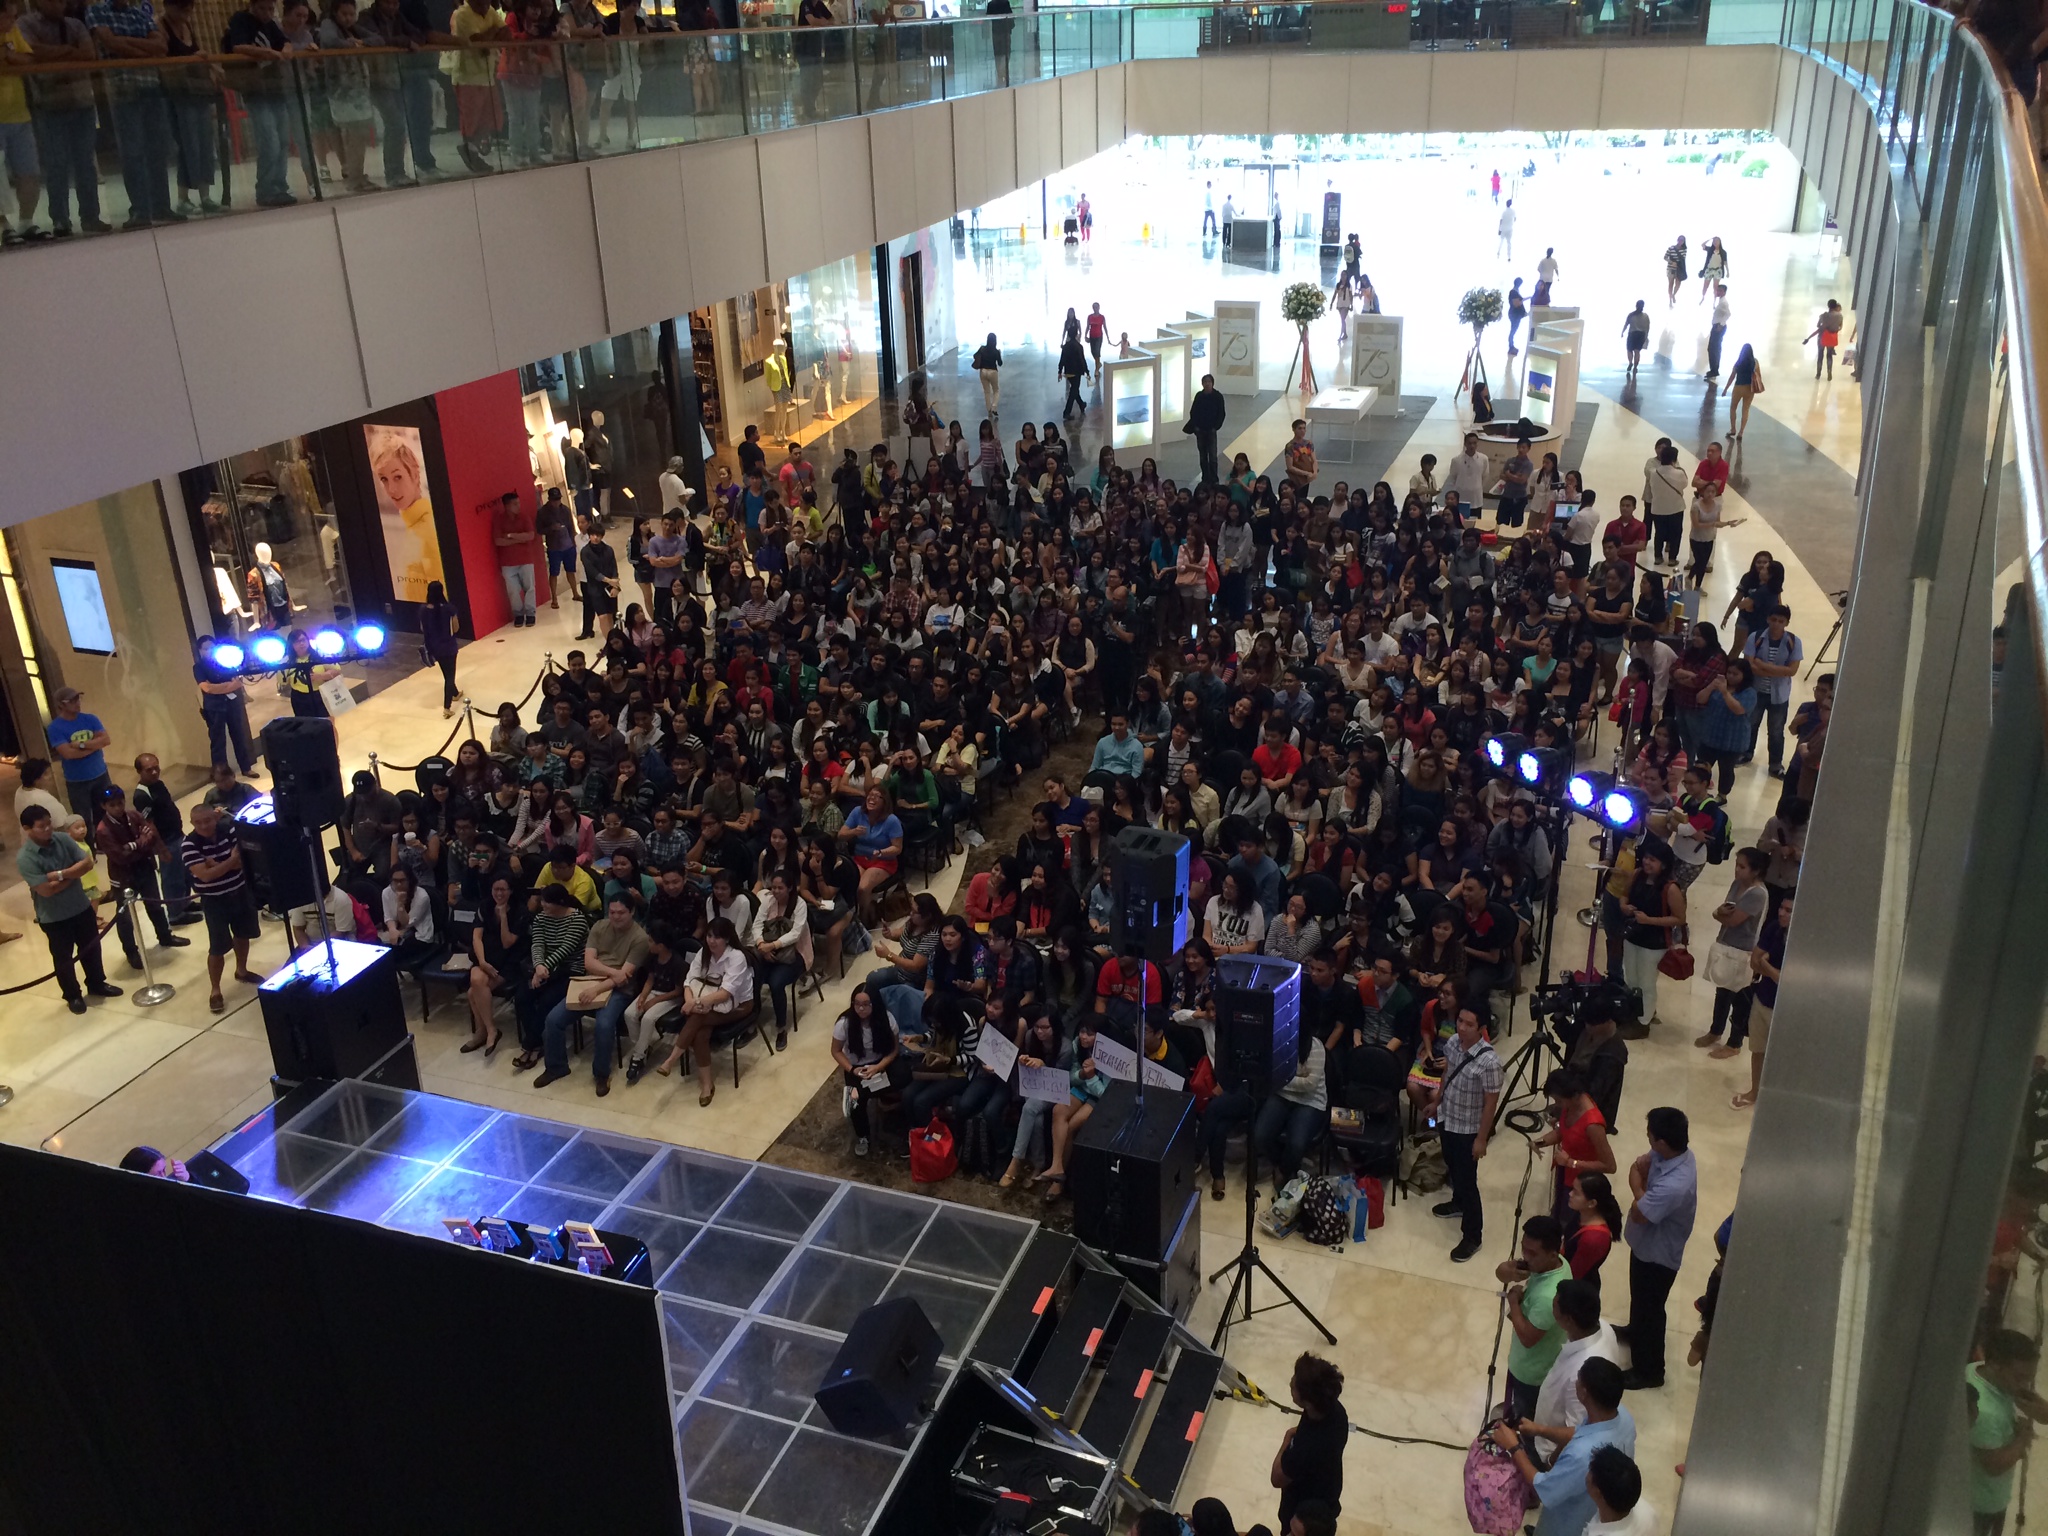 Mall crowd view 2